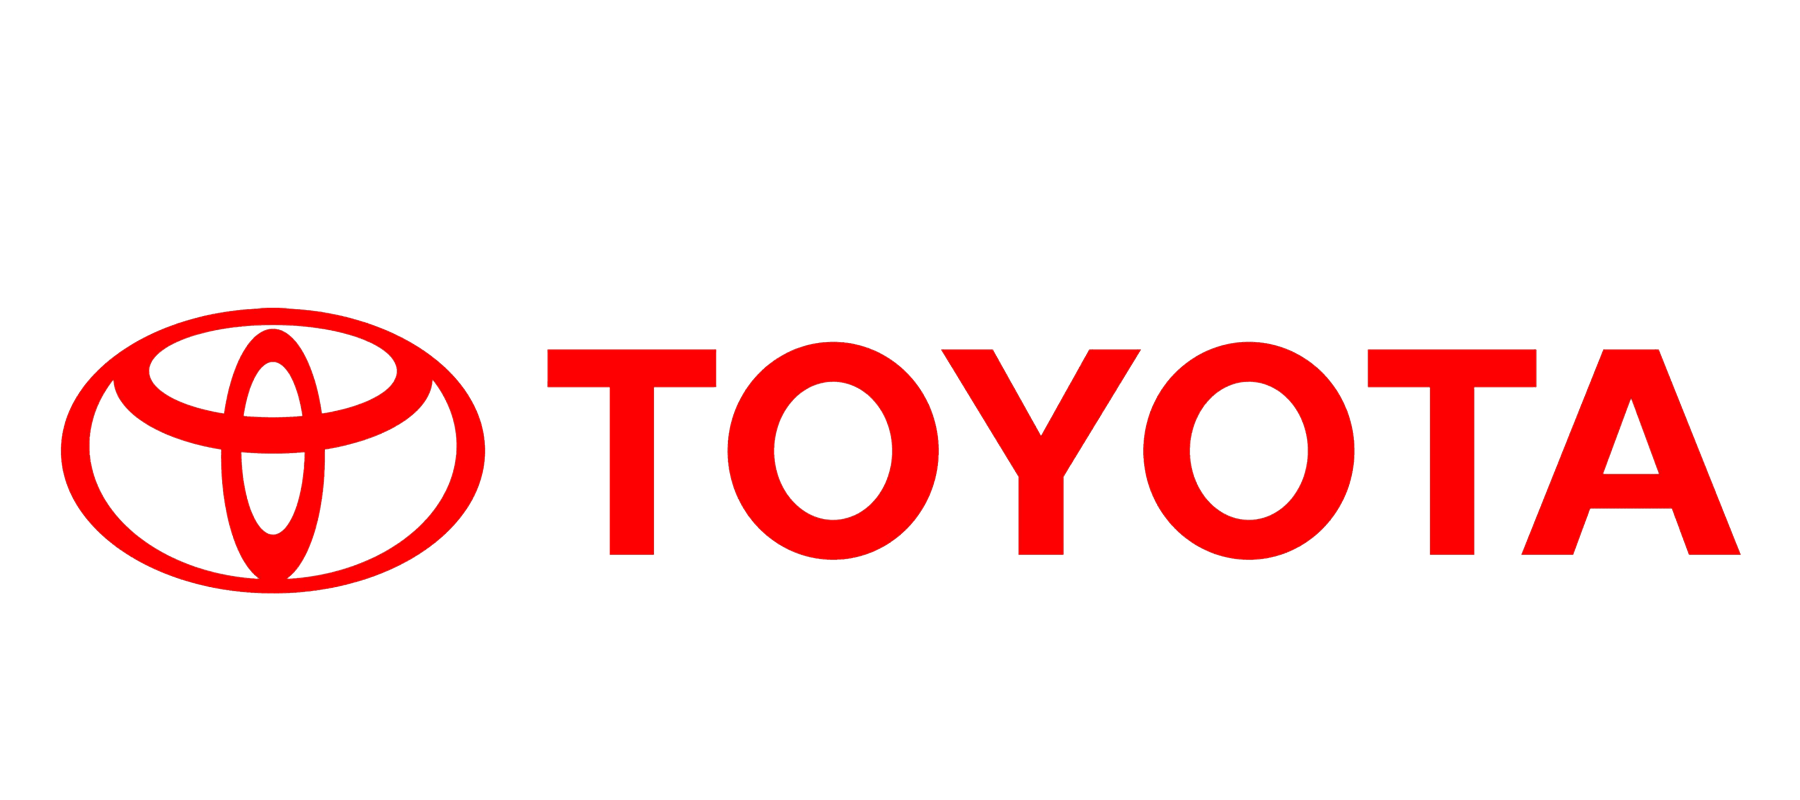 Toyota is Japan’s number one brand for the 16th consecutive year, report